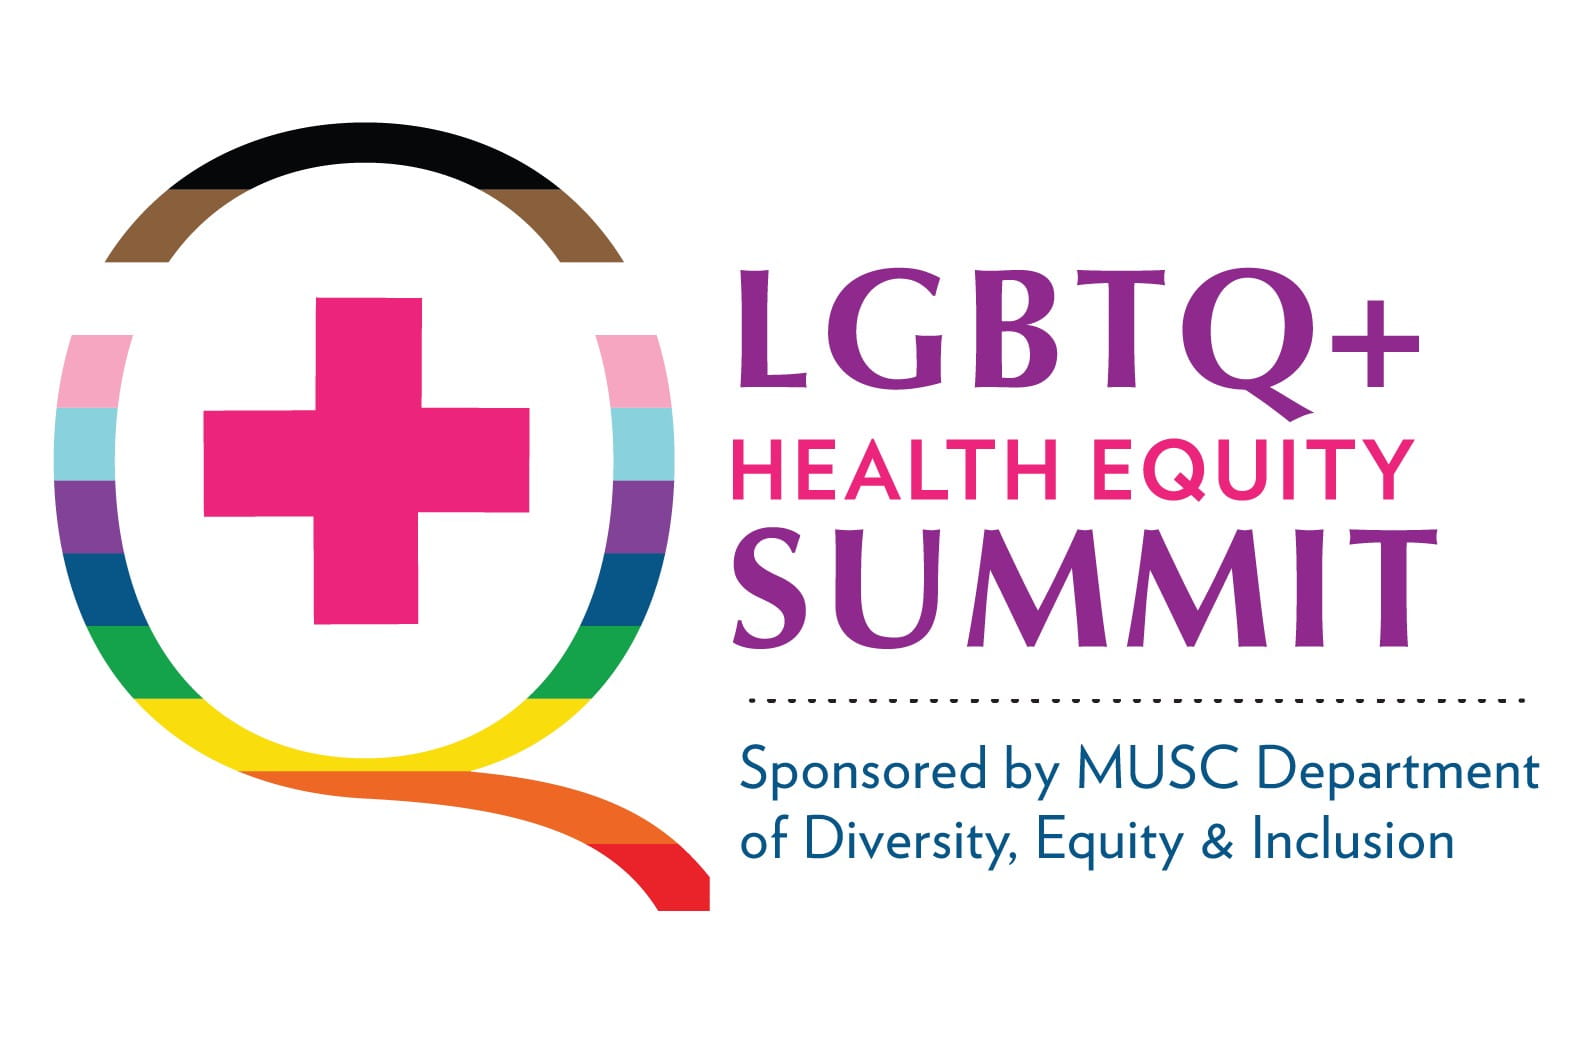 LGBTQ+ Health Equity Summit | Sponsored by MUSC Department of Diversity, Equity & Inclusion